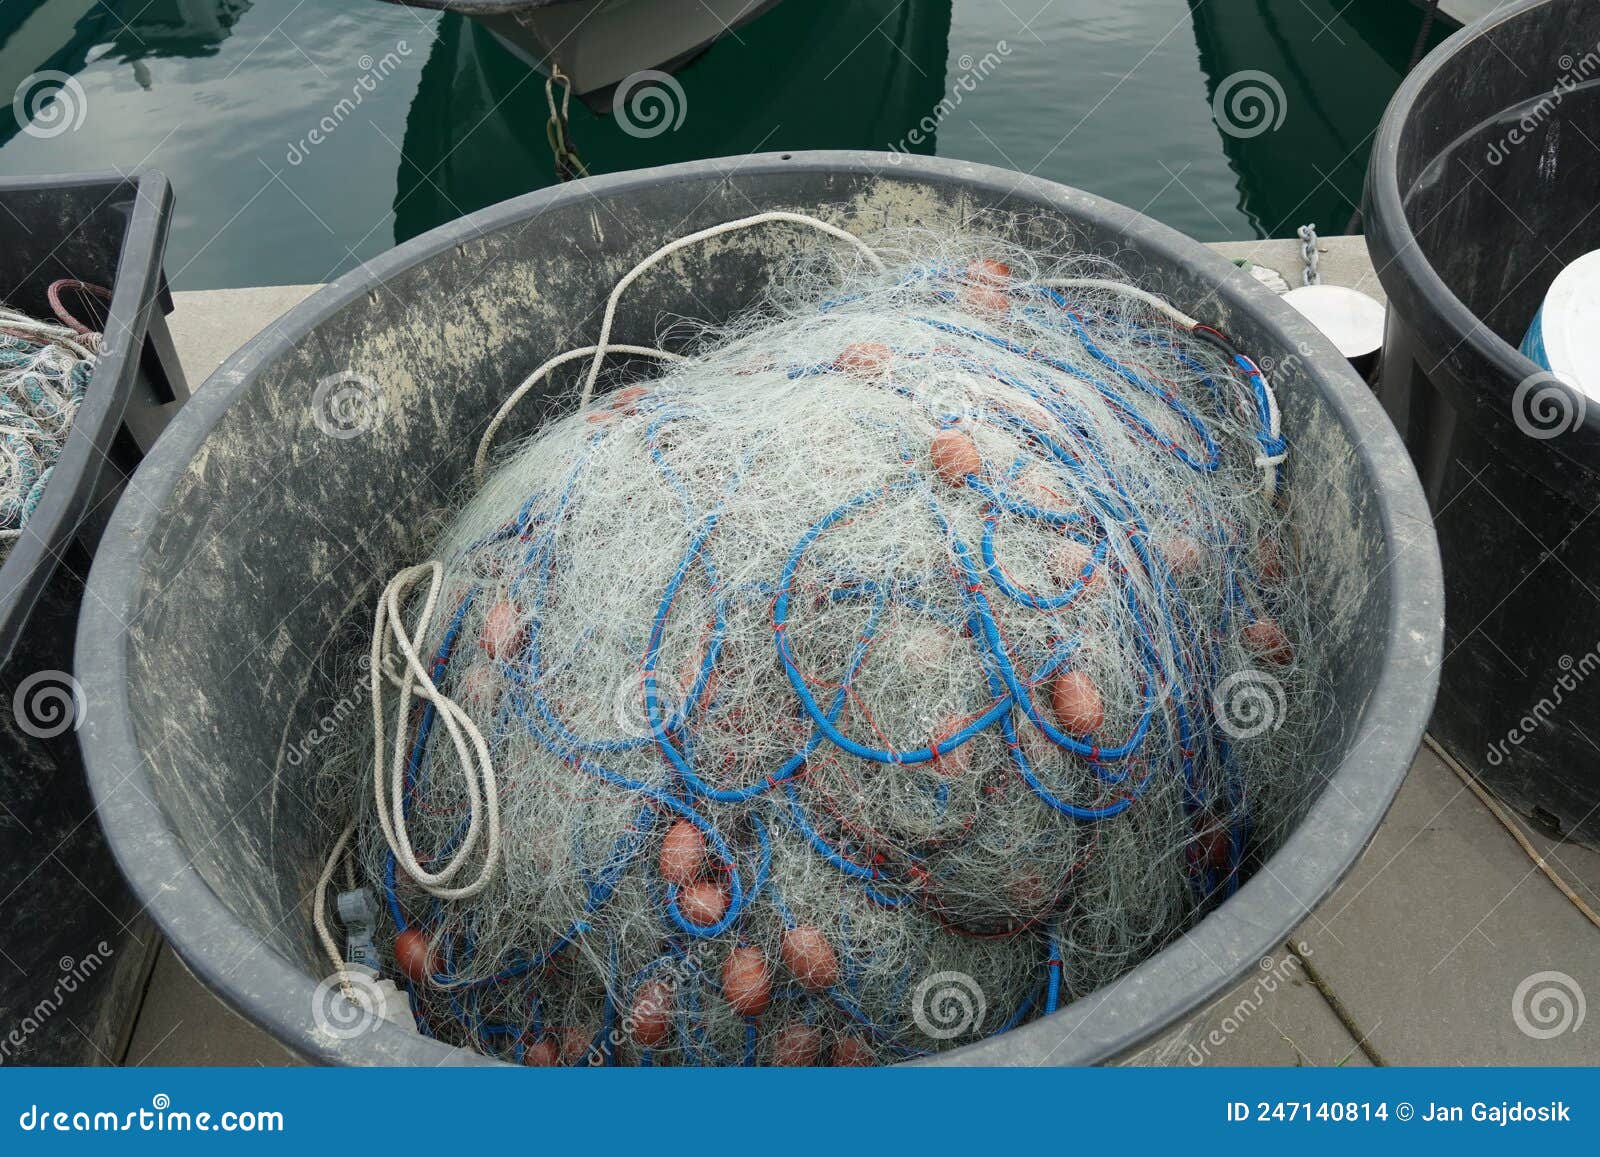 Fishing Net with Blue Ropes and Red-brown Floats Stored in Black